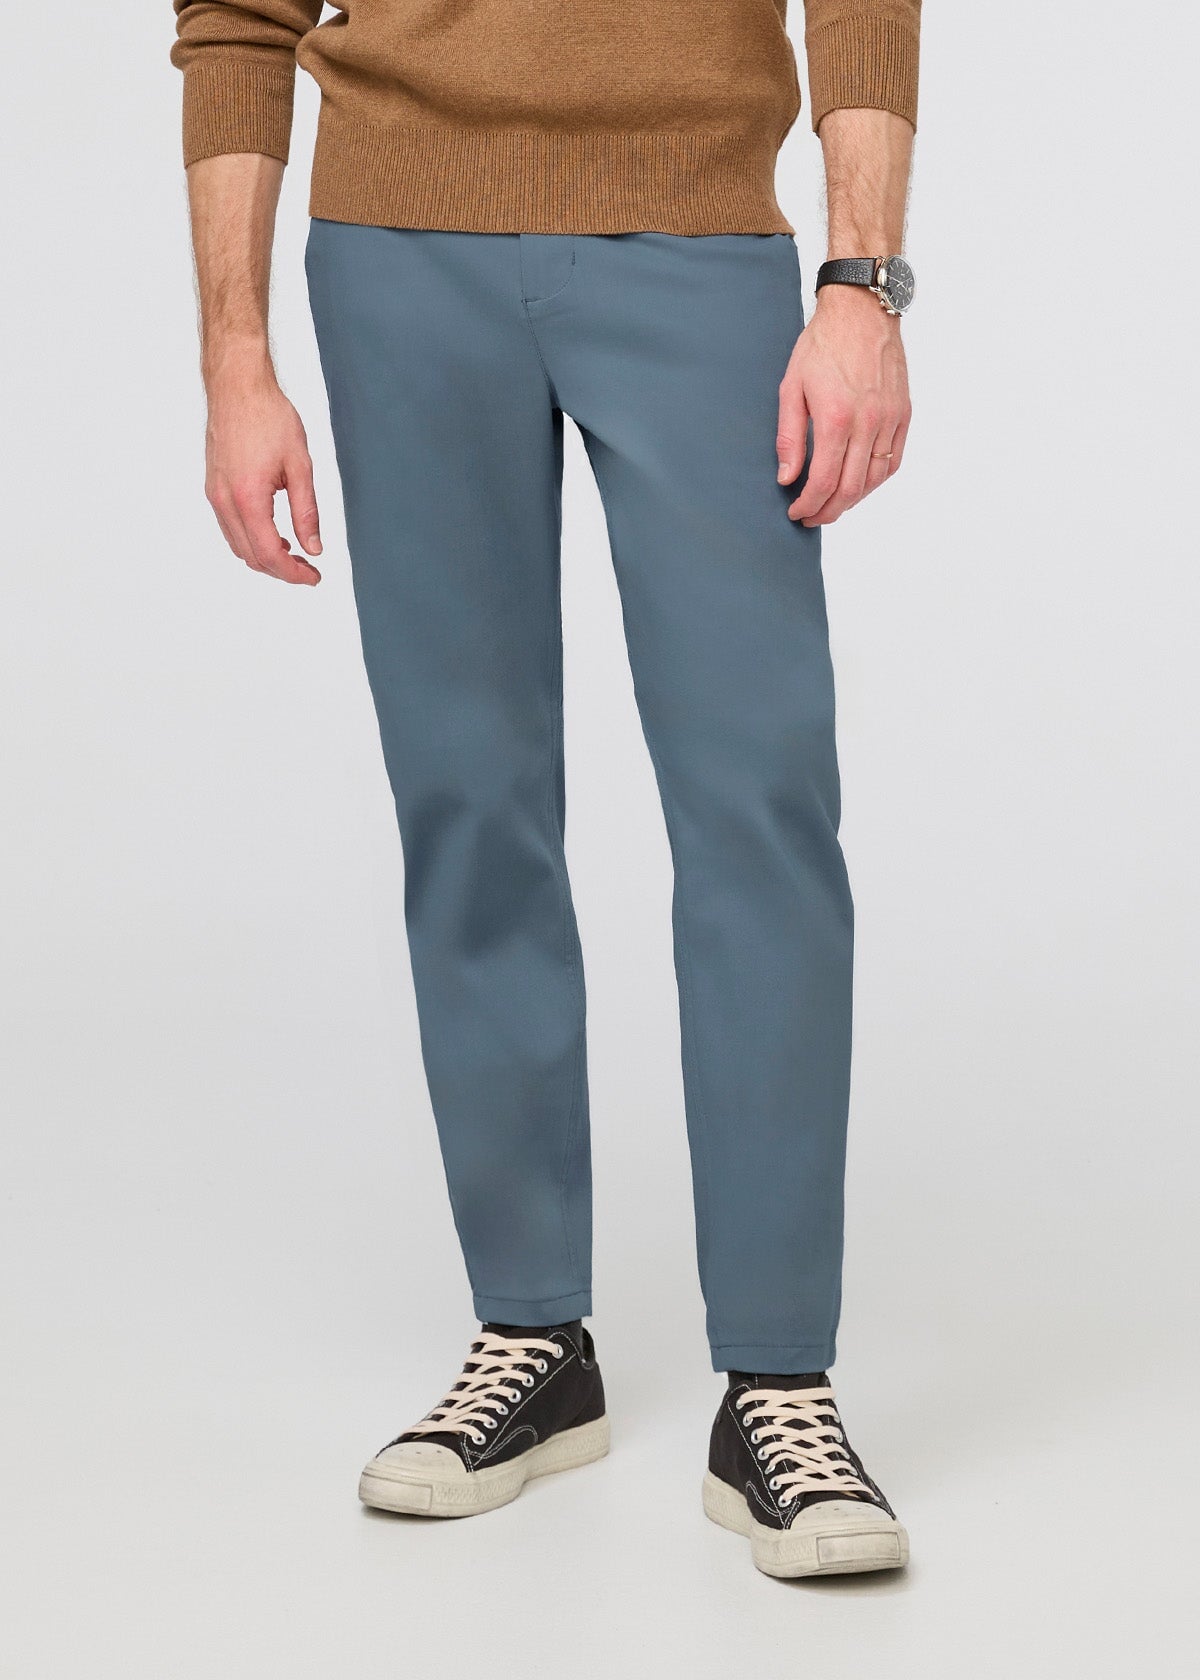 Organic Cotton Men's Chinos in Light Blue | Hawes & Curtis